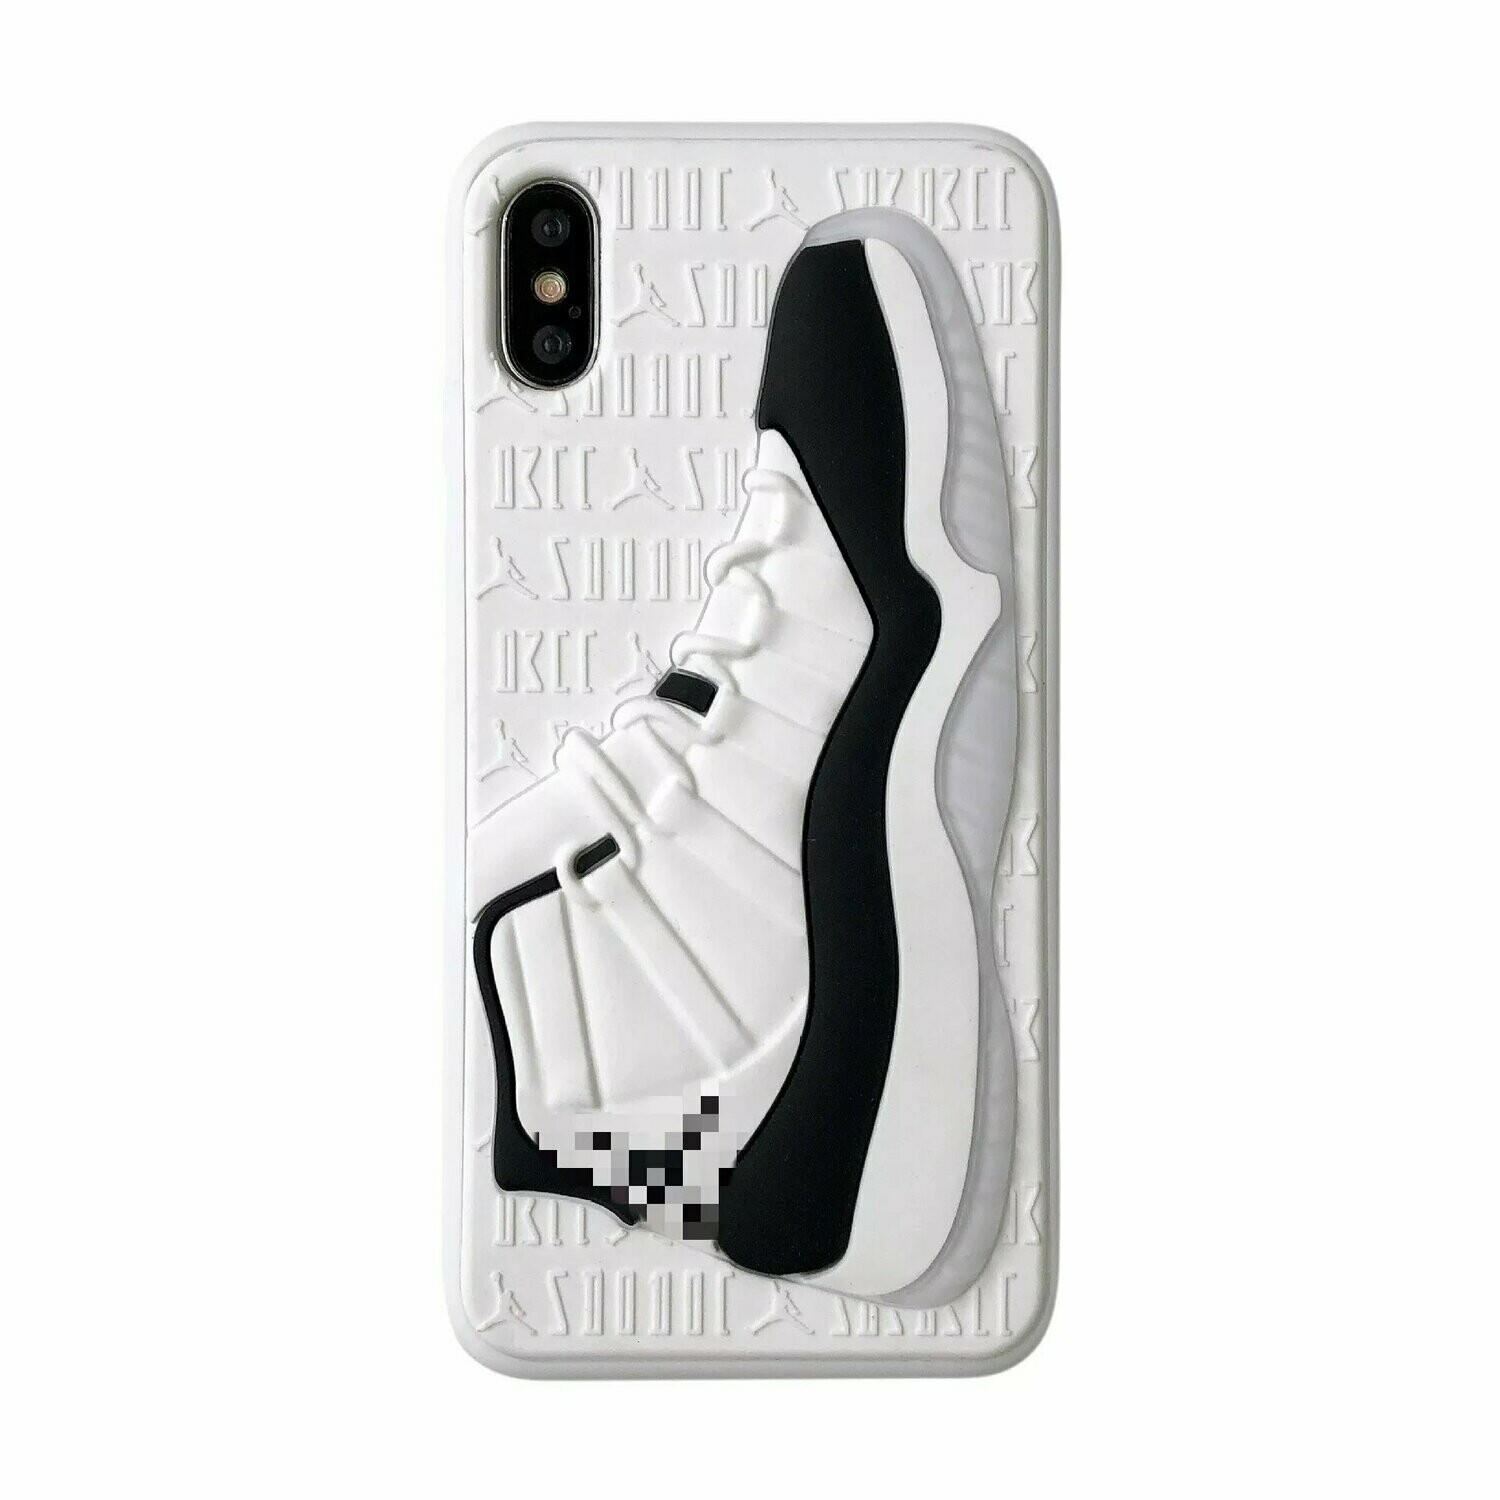 3D Dunk Sport Basketball Shoe Phone Case - iPhone XS Max 11 Pro Max, XS